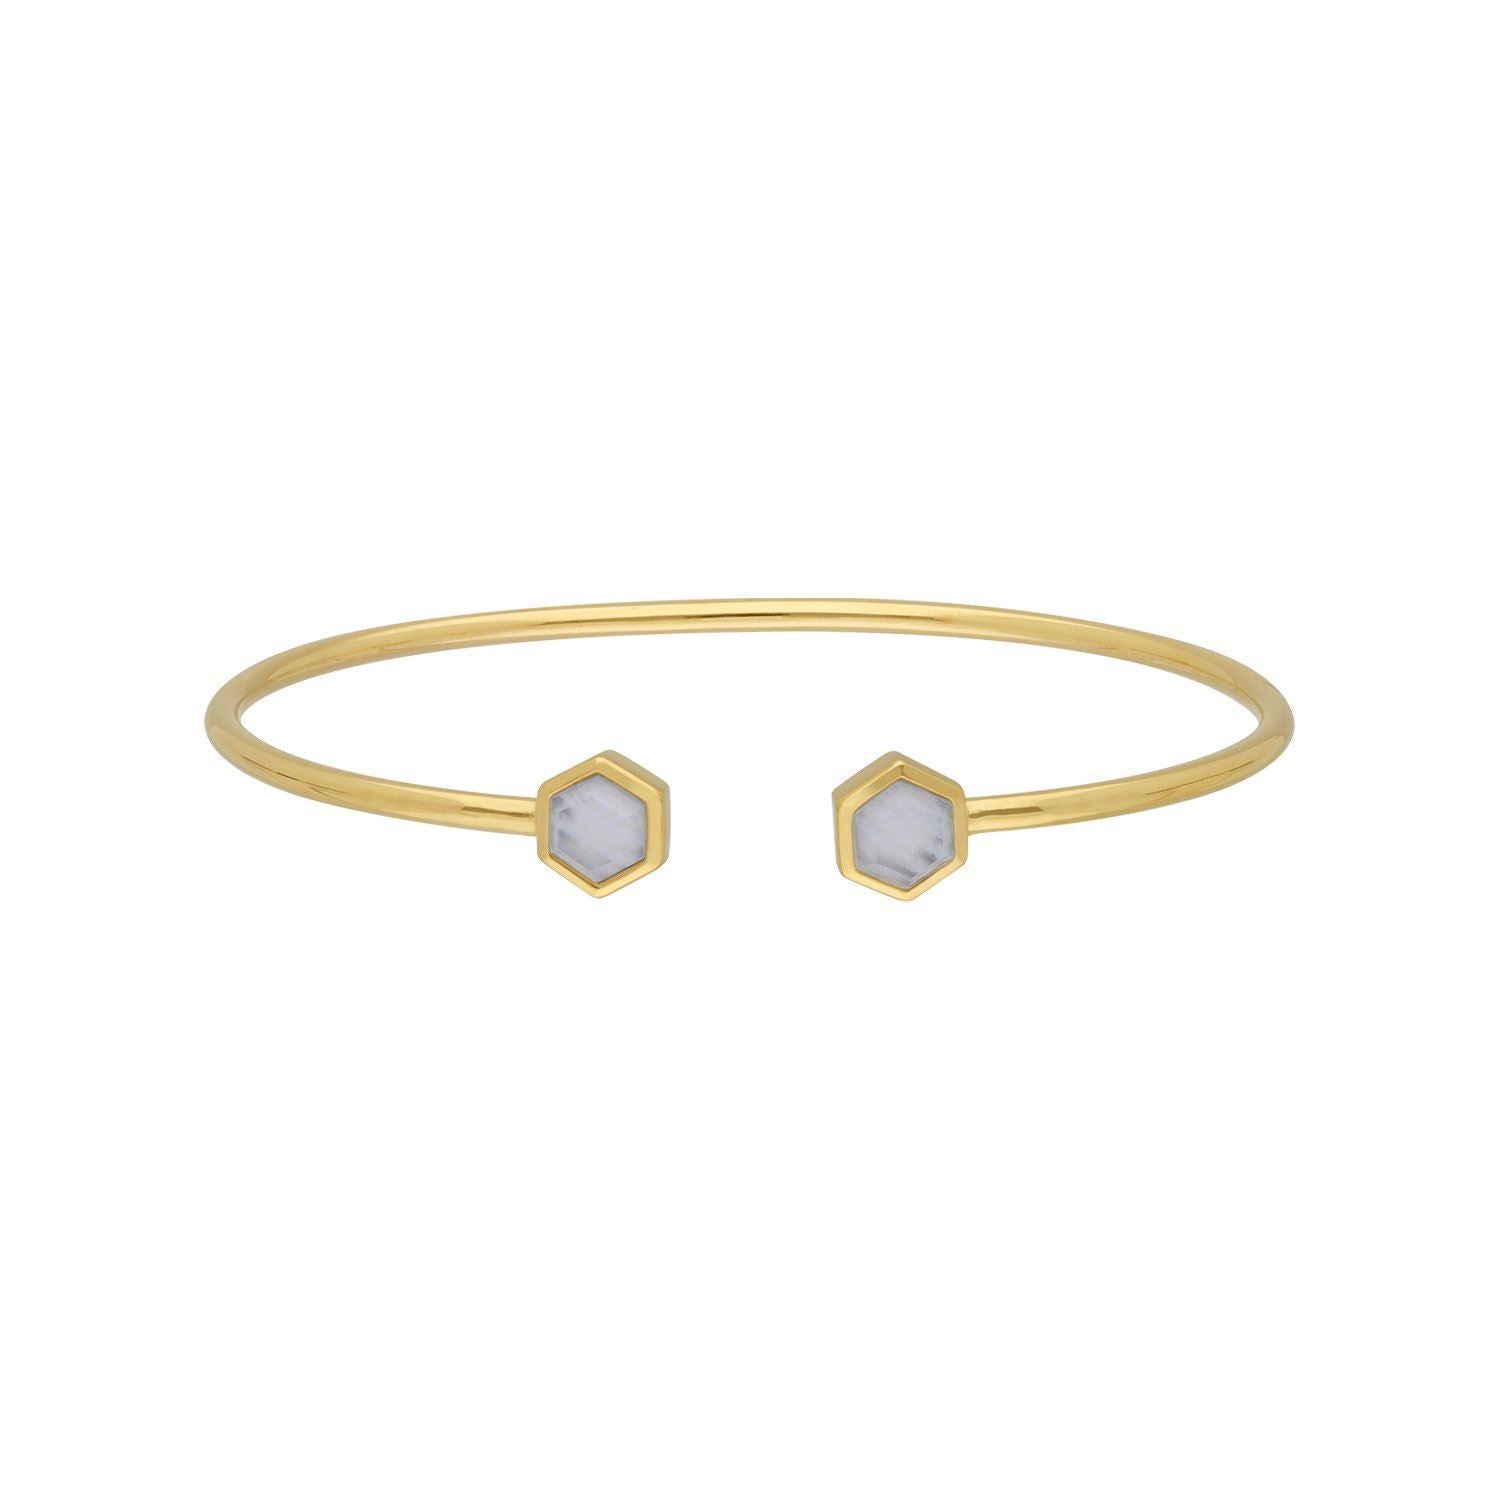 Geometric Hexagon Blue Lace Agate Bangle in Gold Plated Sterling Silver